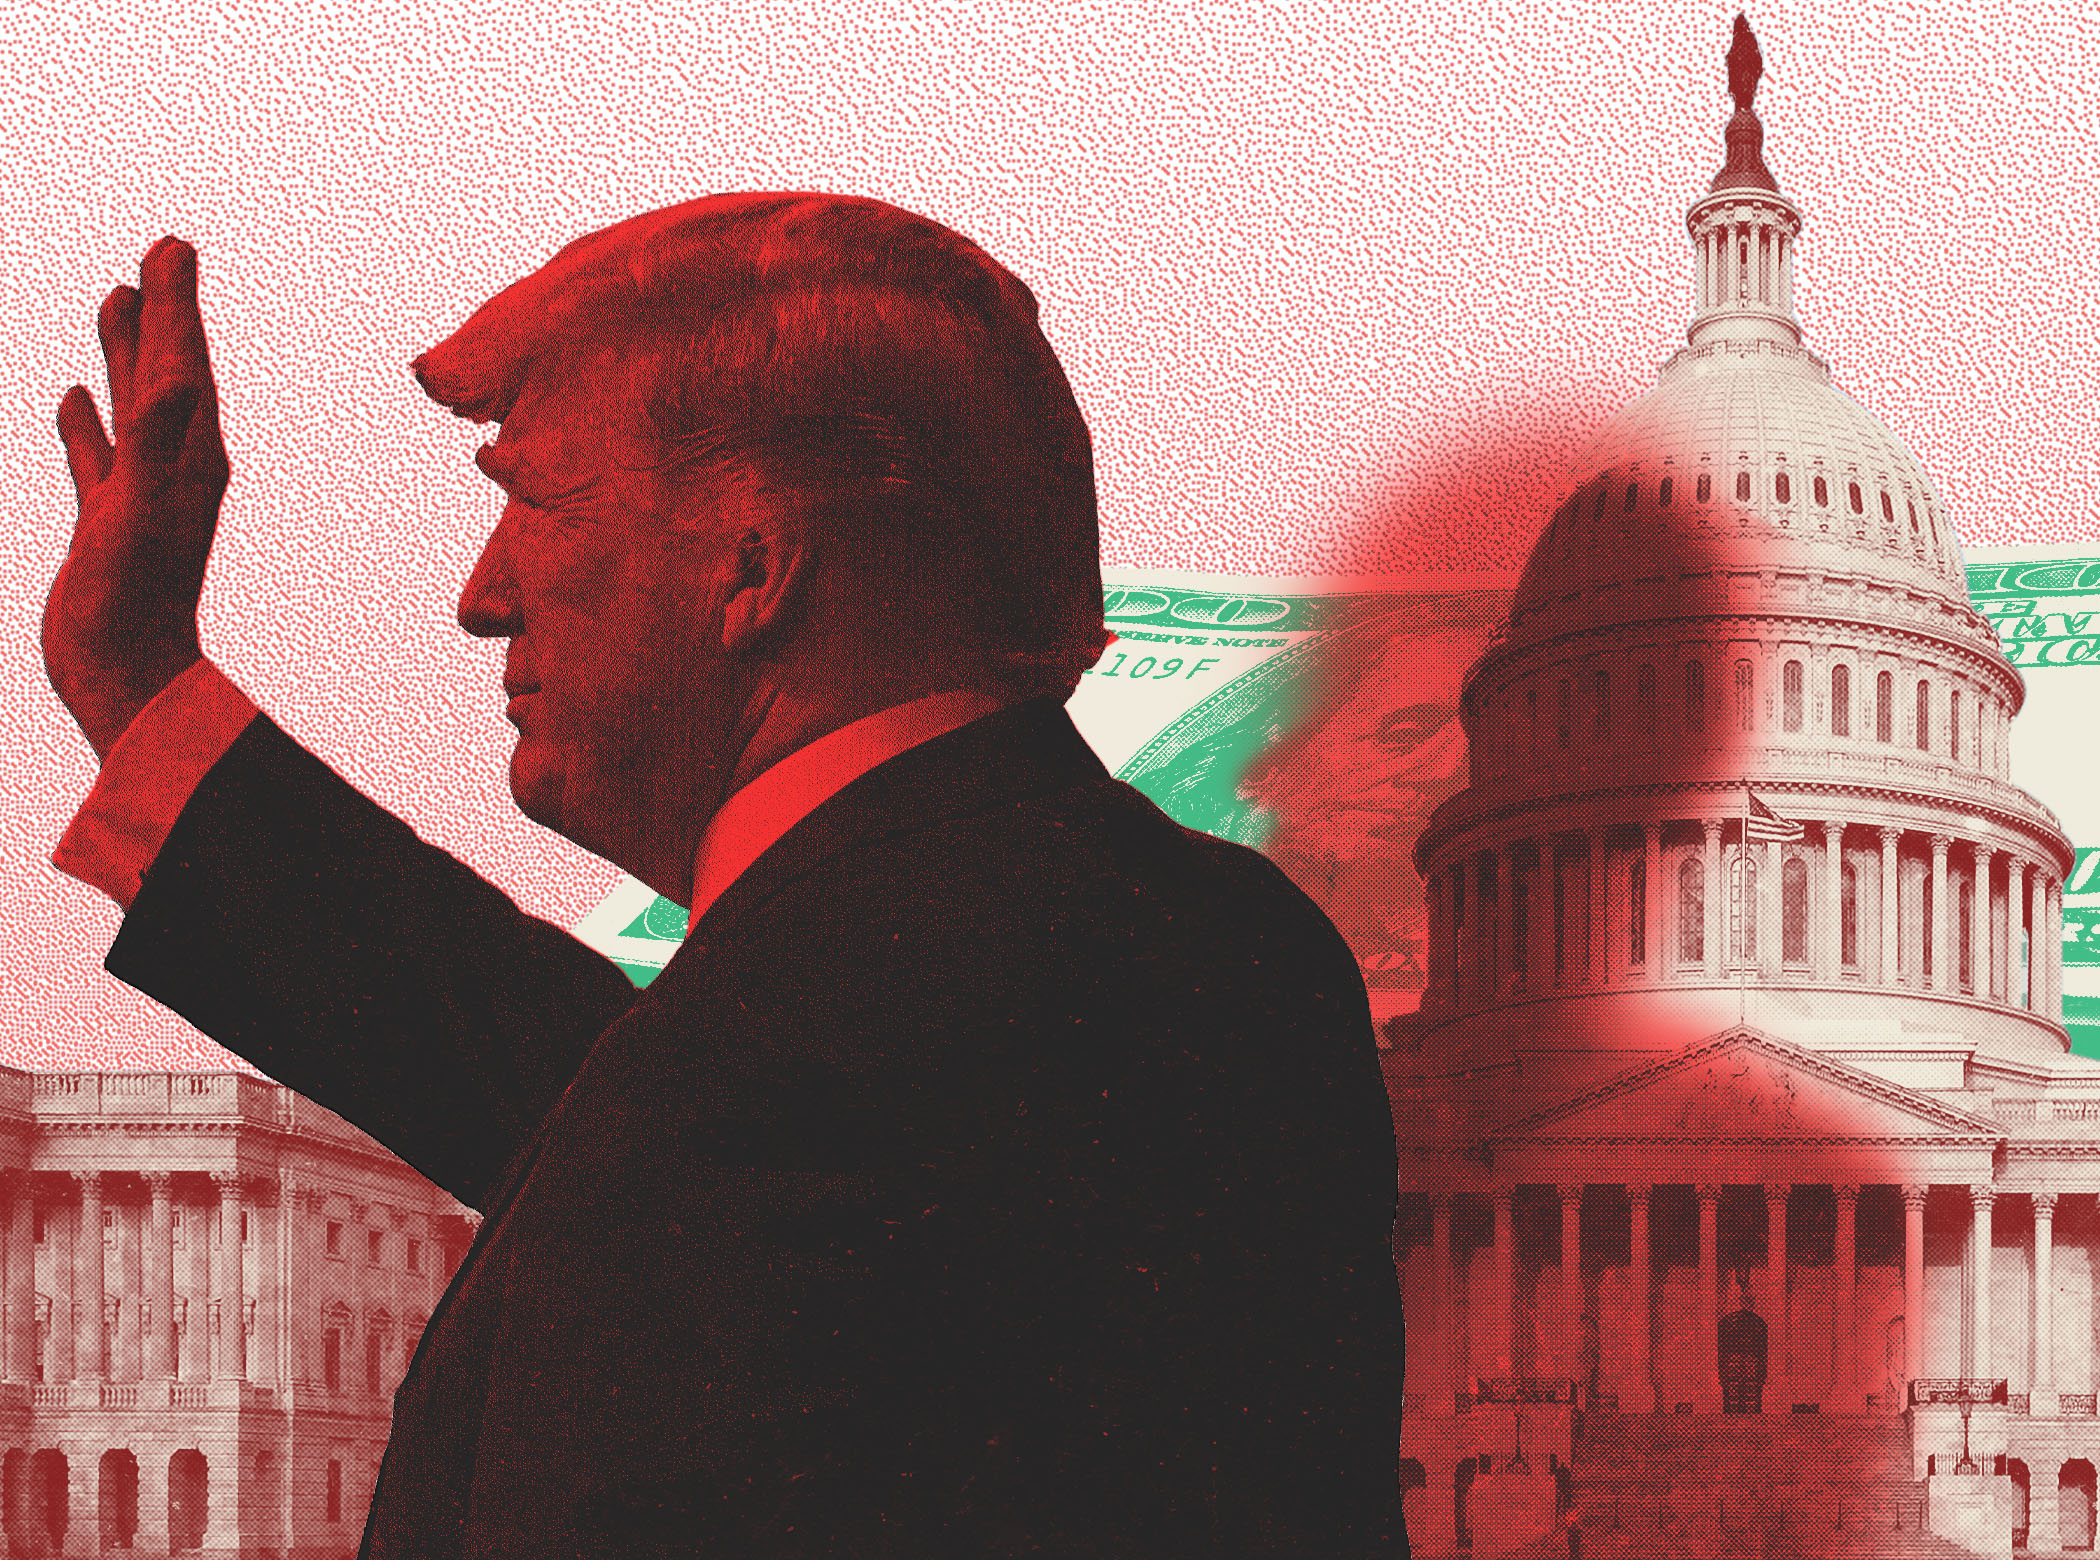 Then-president Trump is seen from the side as he raises his right arm. He is cast in a dark red and black hue and overlaid by photocopy texture. In the background is a red-tinted Capitol building and large stack of $100 bills, both cast over by Trump's shadow.